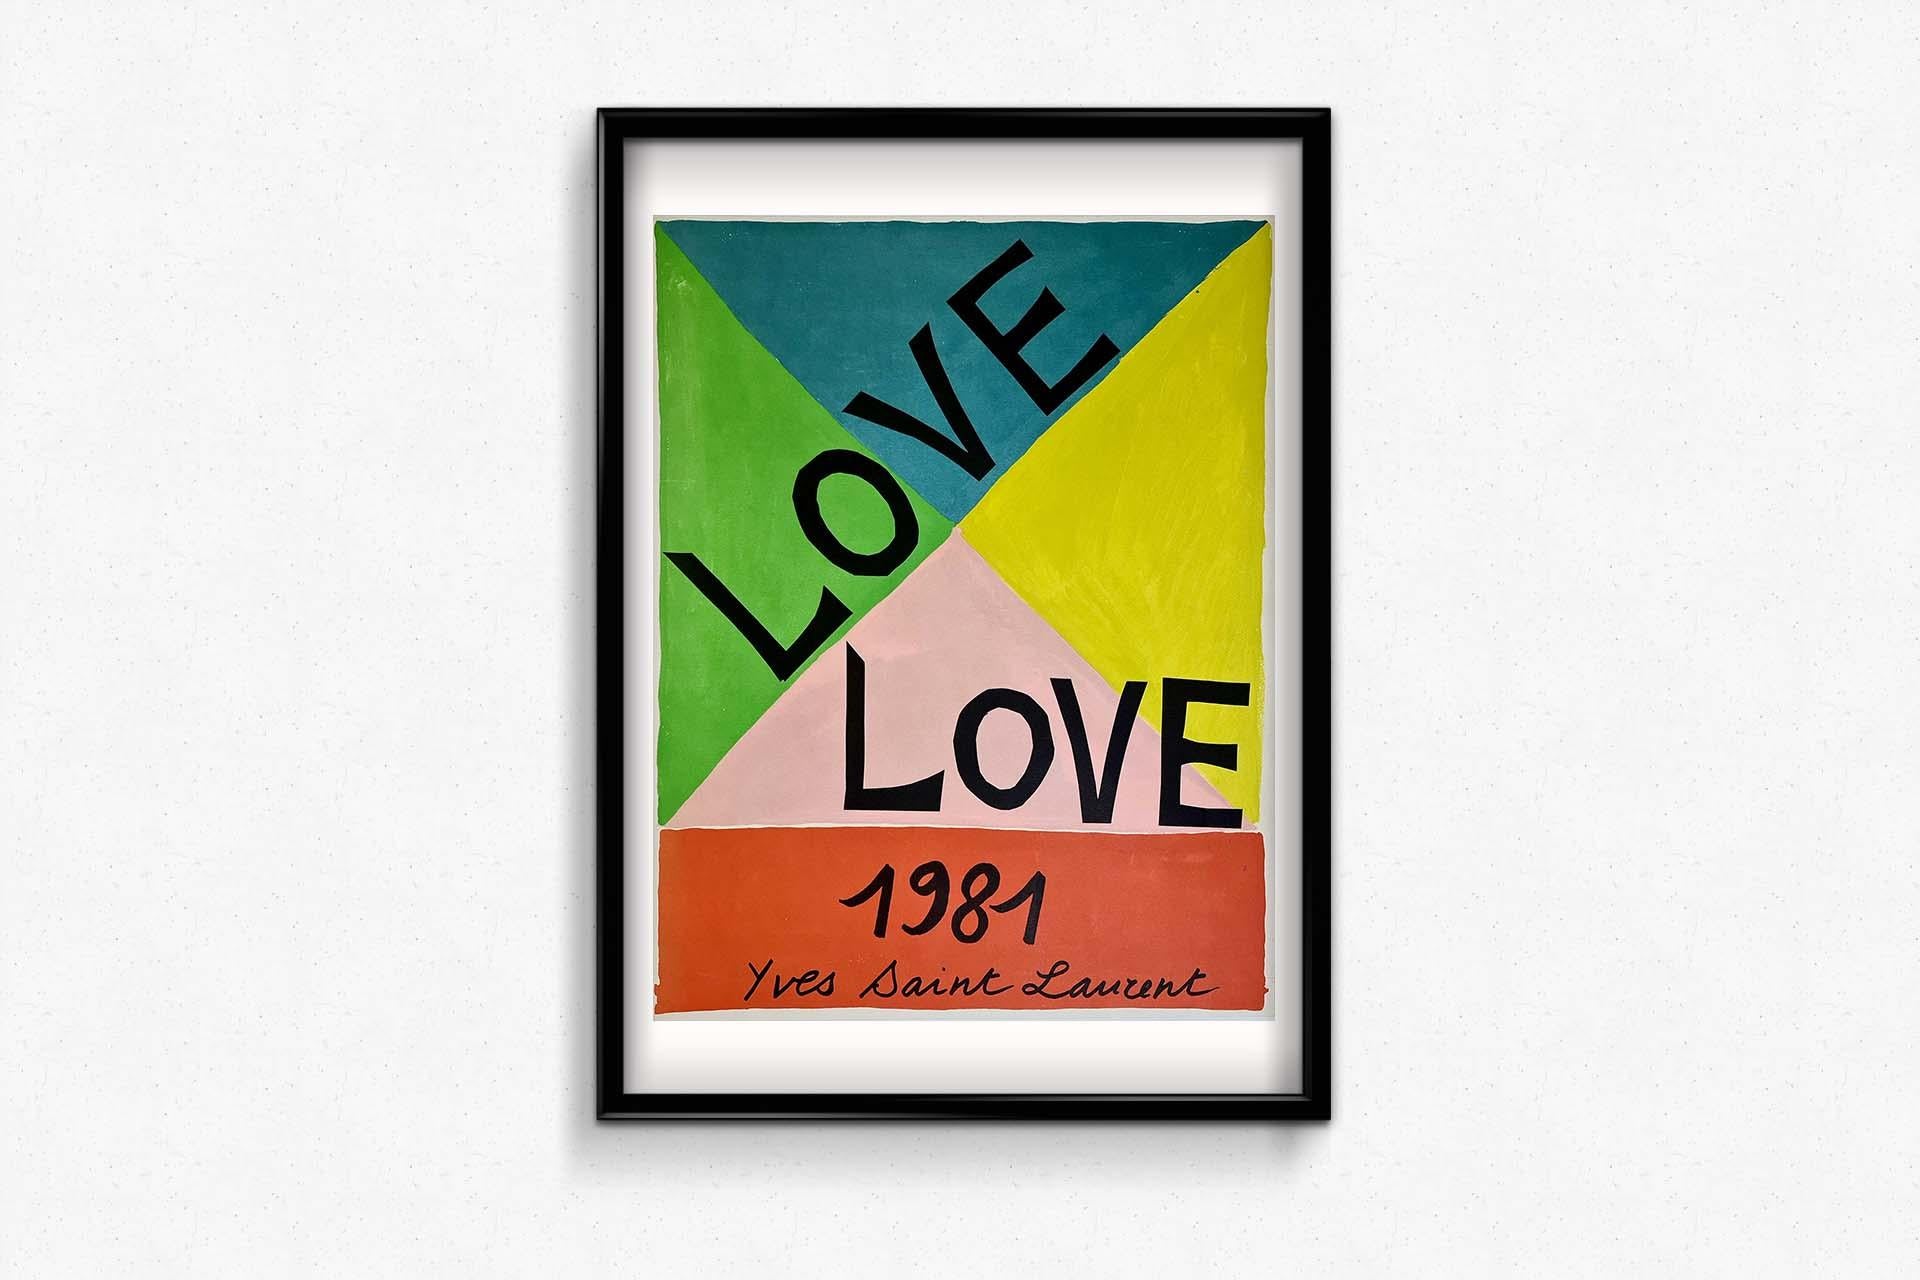 Crafted in 1981 as part of a series of annual greeting cards, the original poster titled 